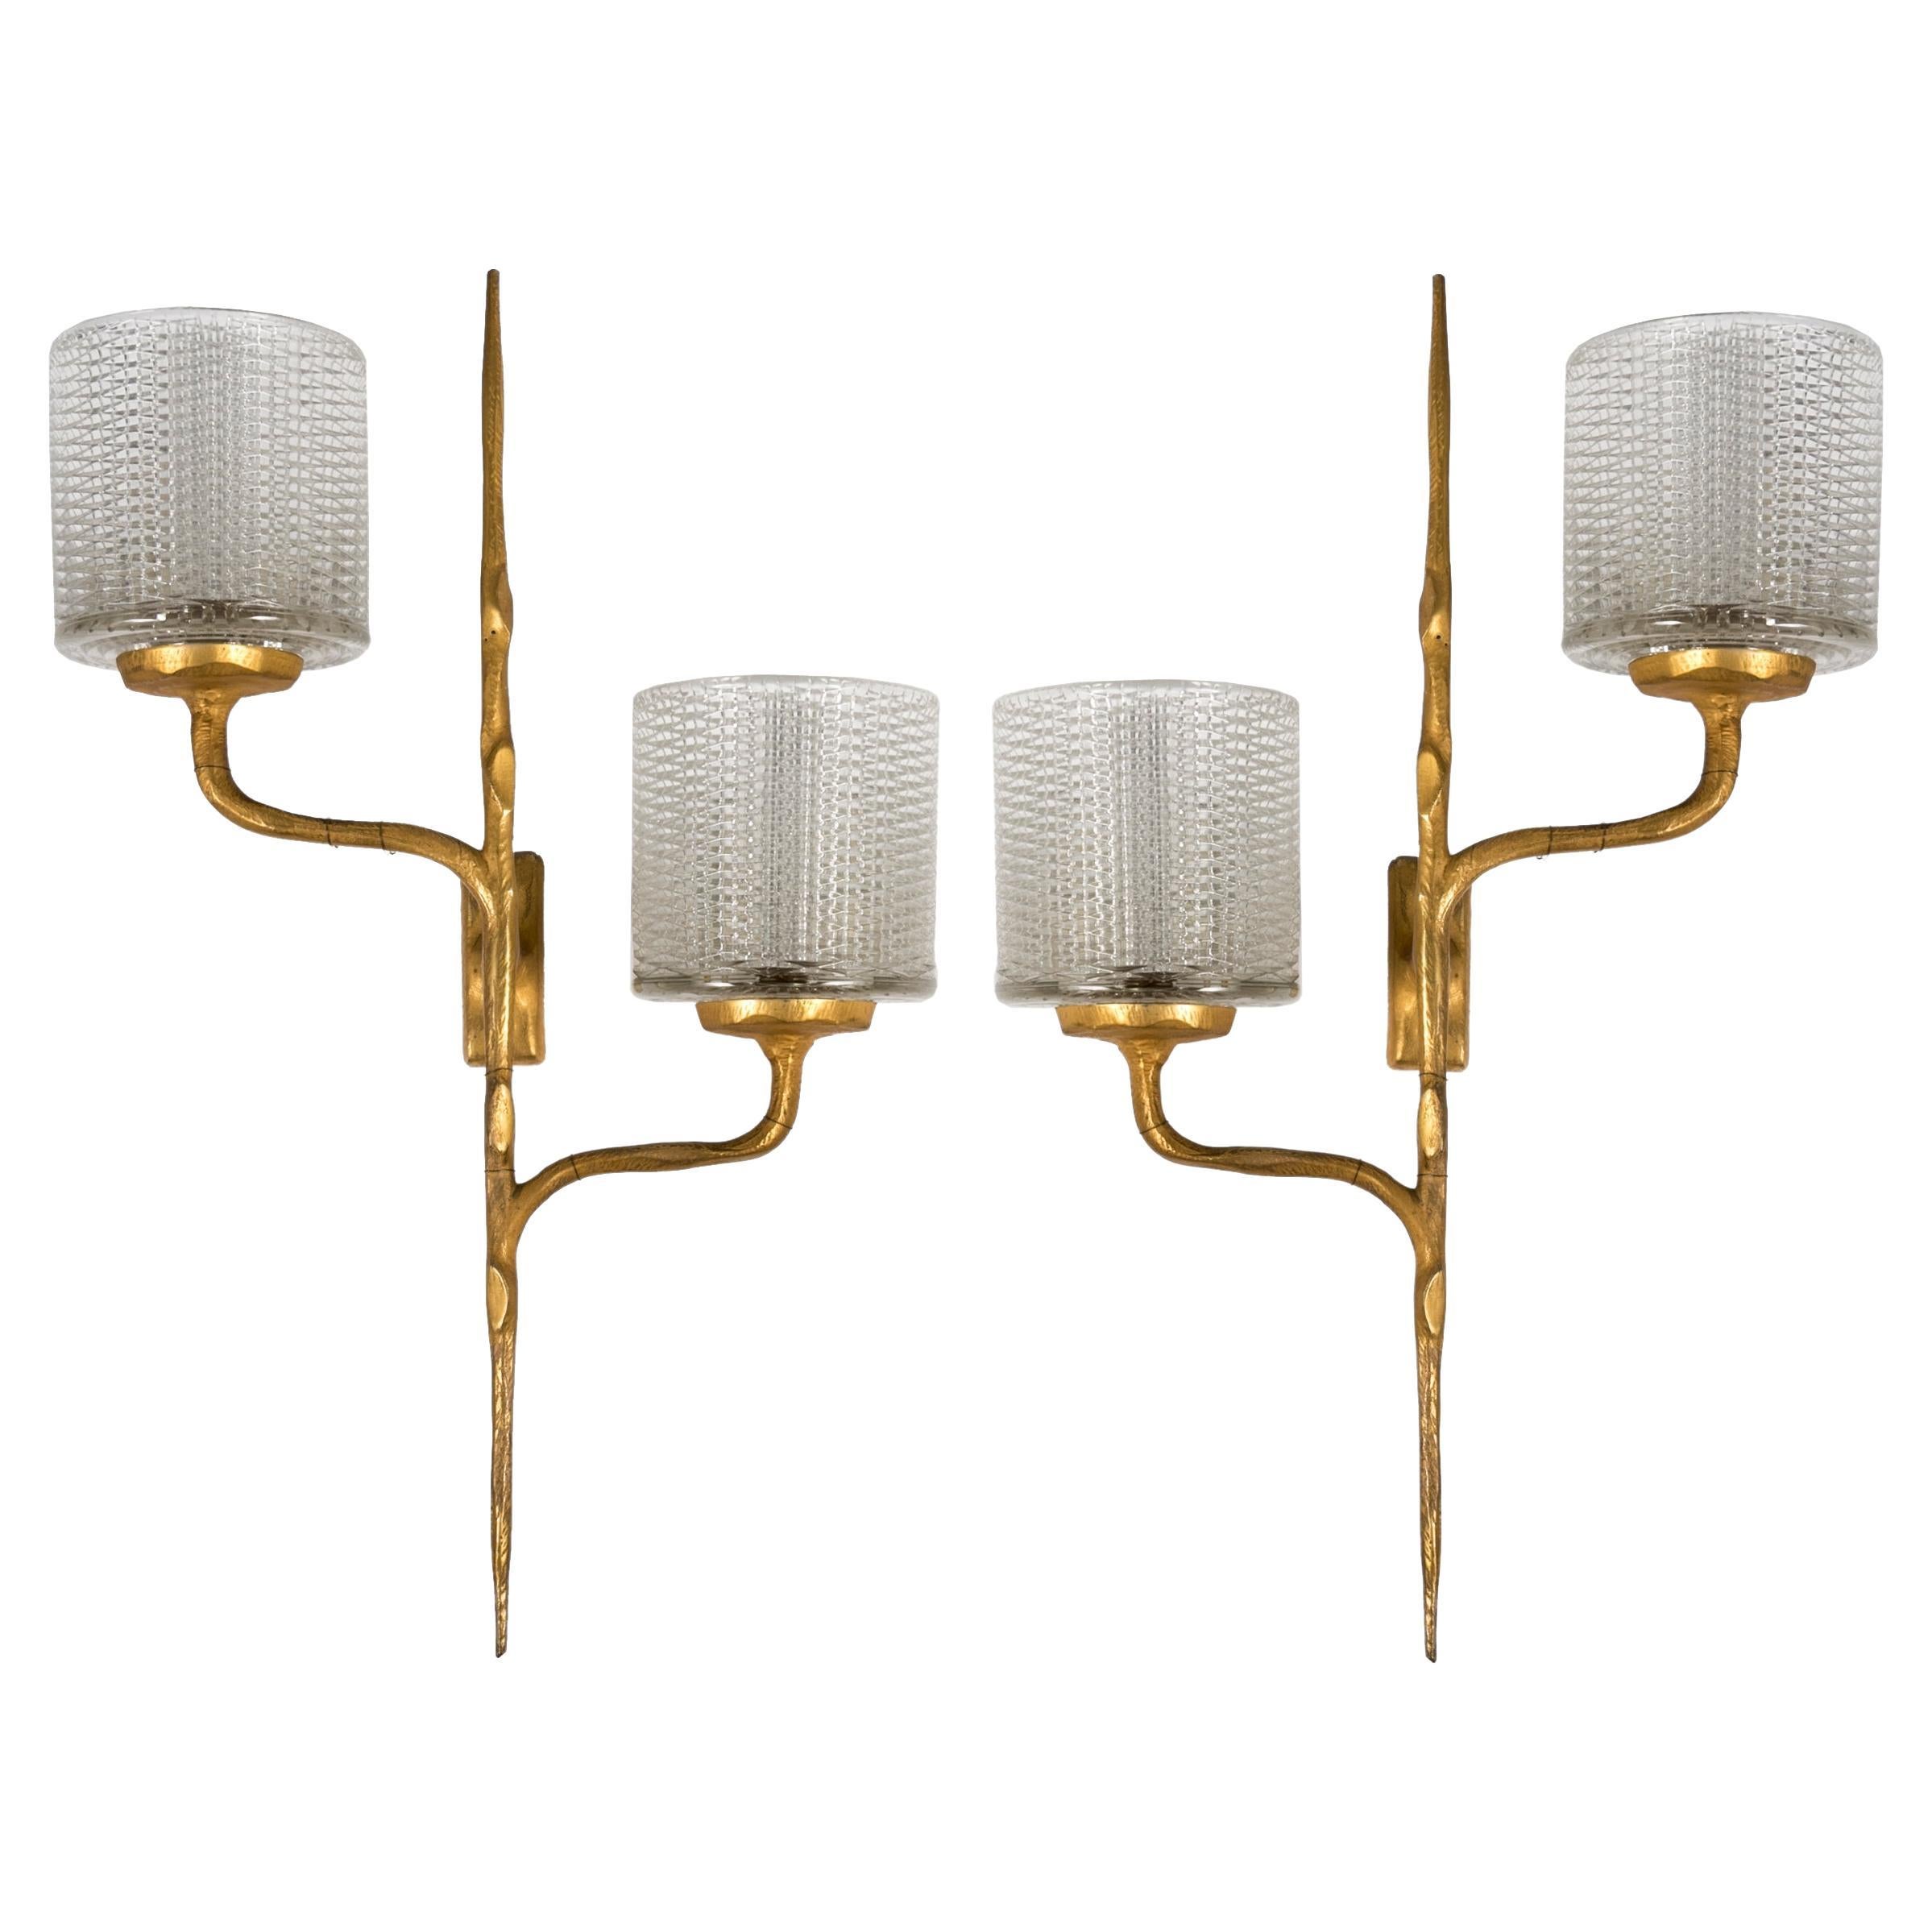 19060's, Golden Bronze Two Arms Wall Light